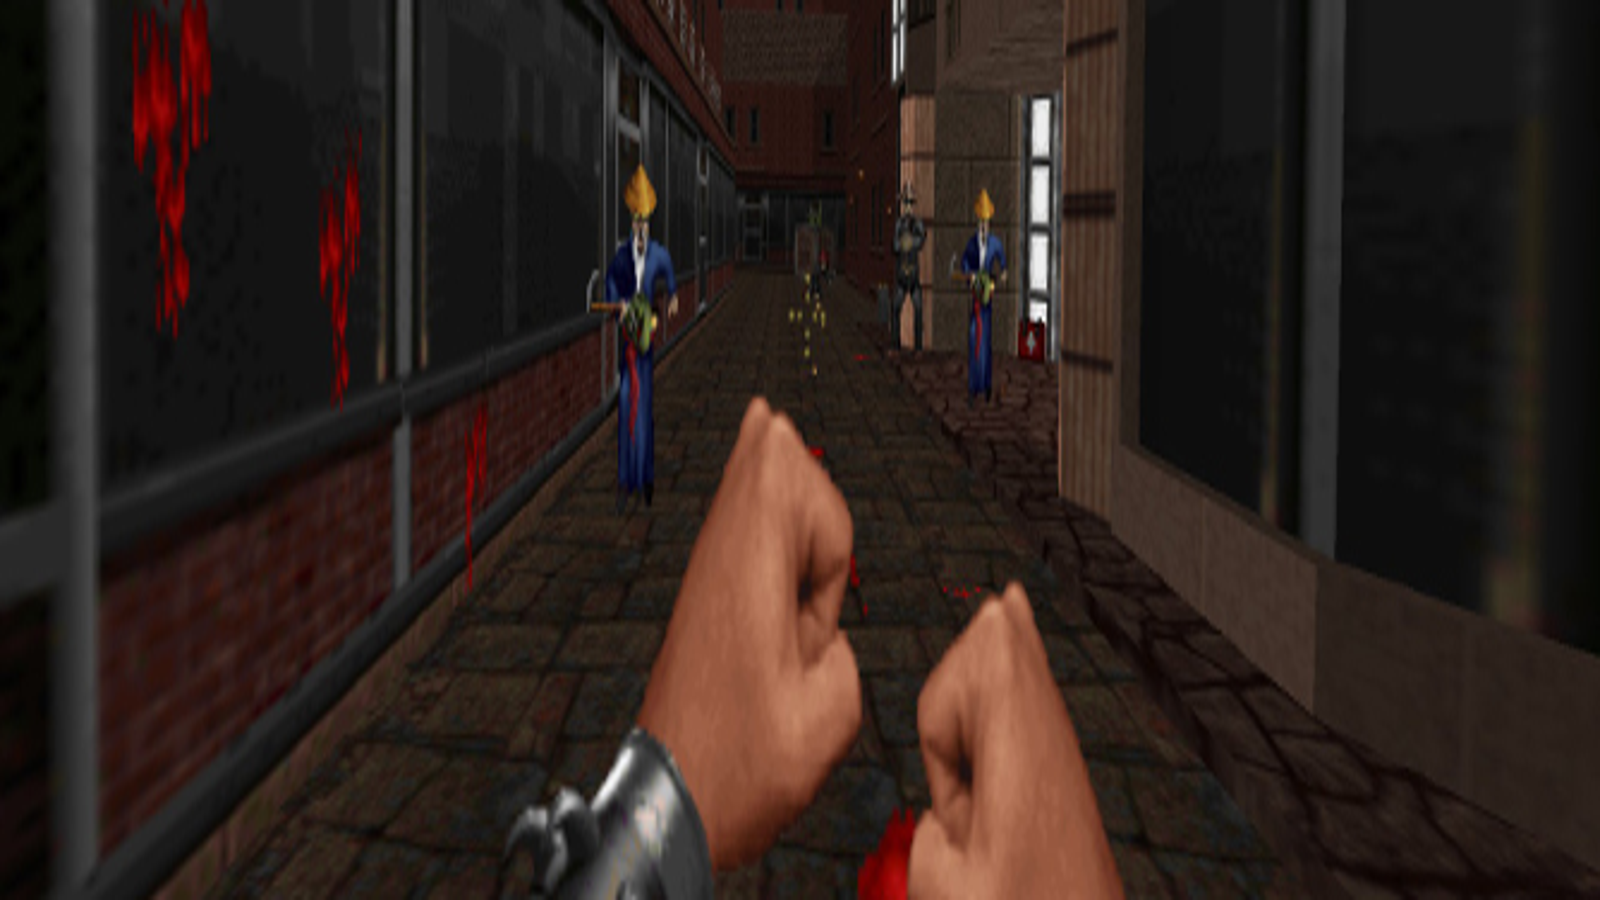 Shadow Warrior Classic Redux headed to Steam